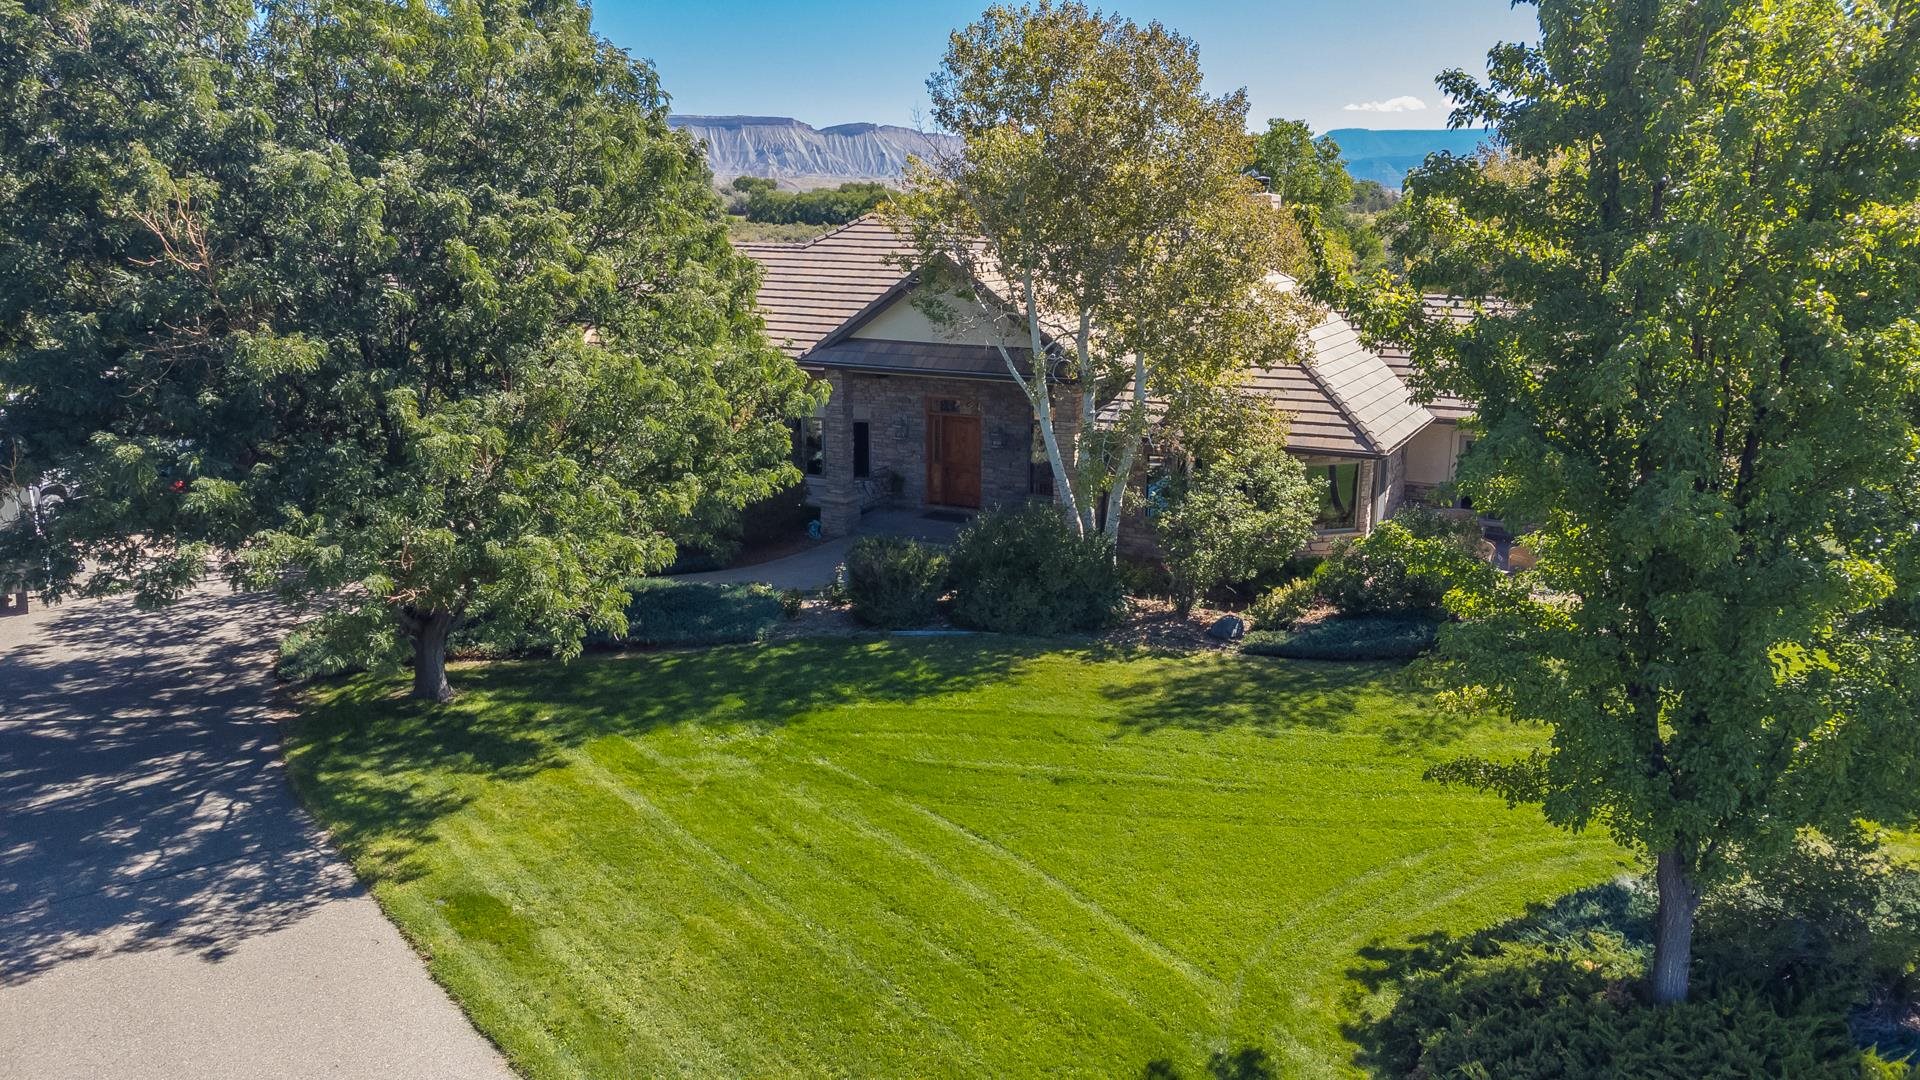 948 25 Road, Grand Junction, CO 81505